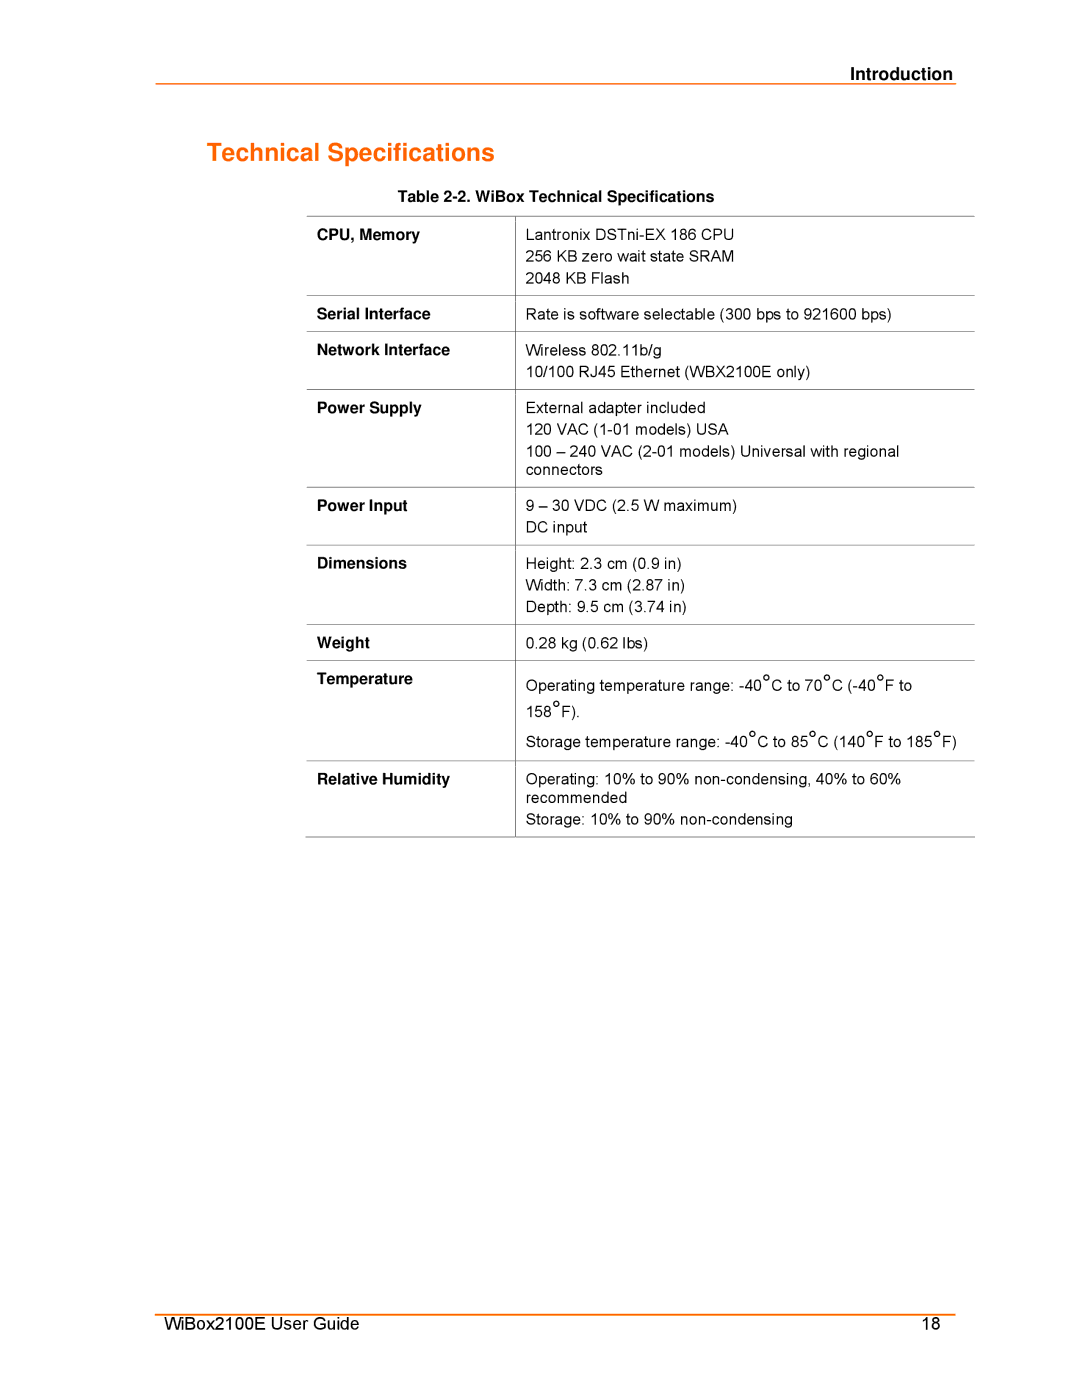 Lantronix Ethernet manual Technical Specifications 